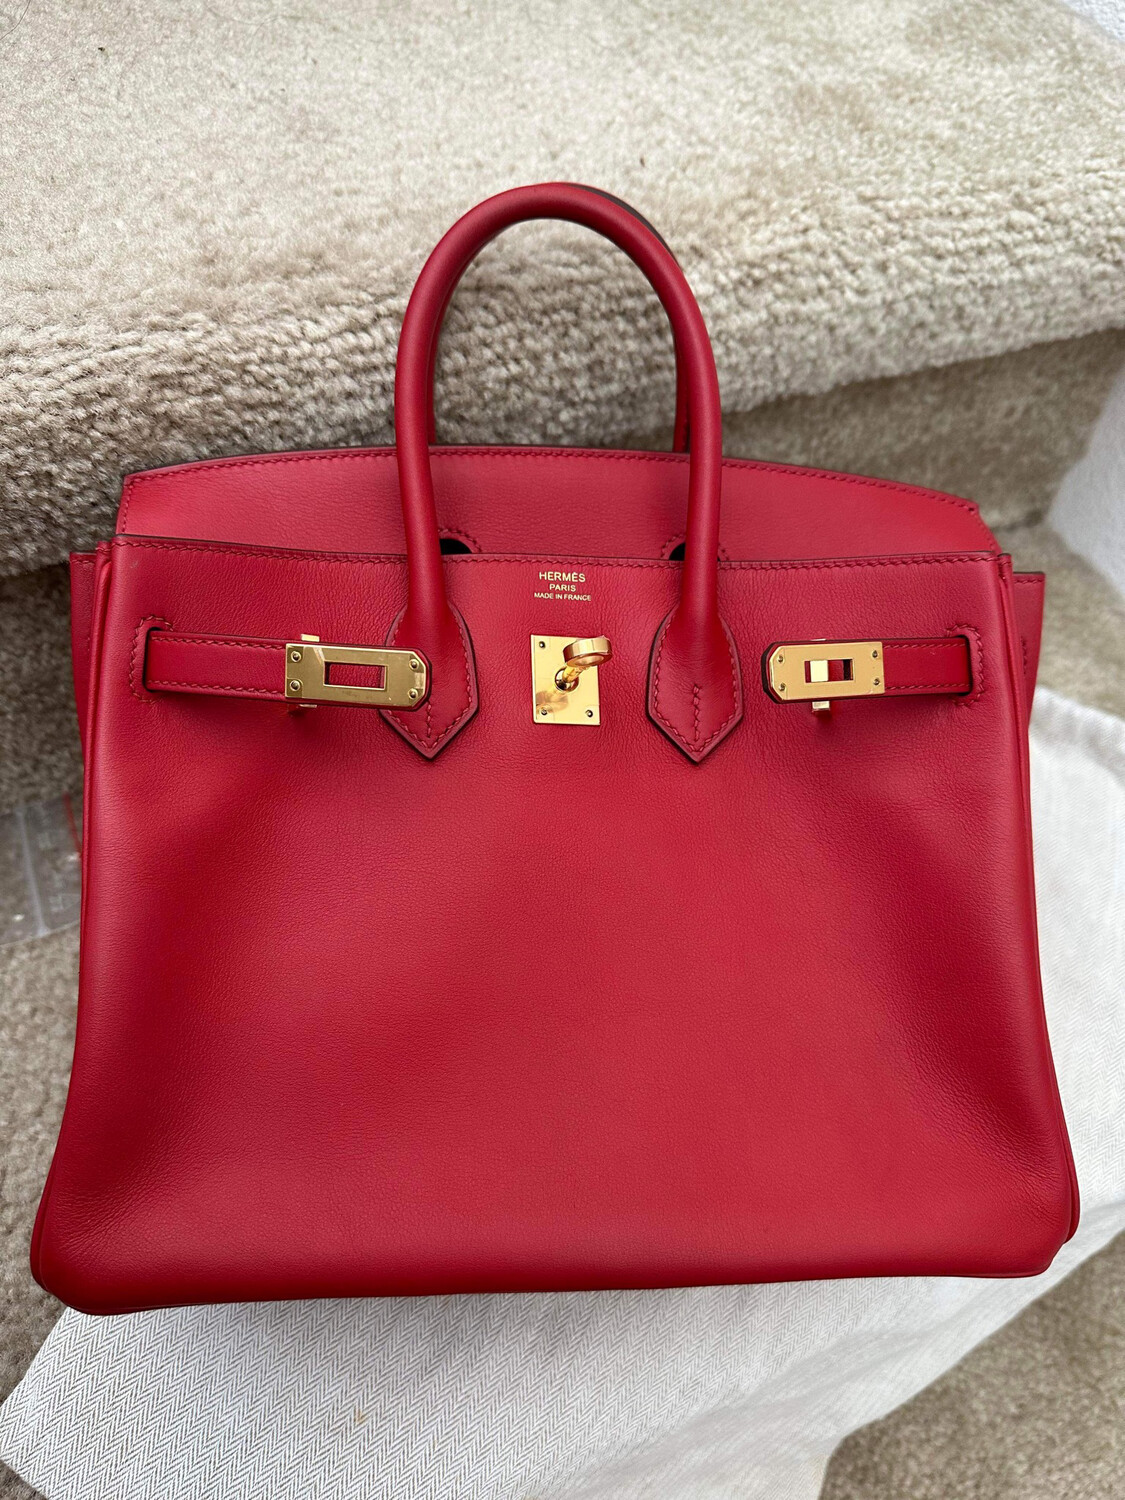 Hermes Birkin 25 Red Swift Leather, Gold Hardware, Preowned In Box P